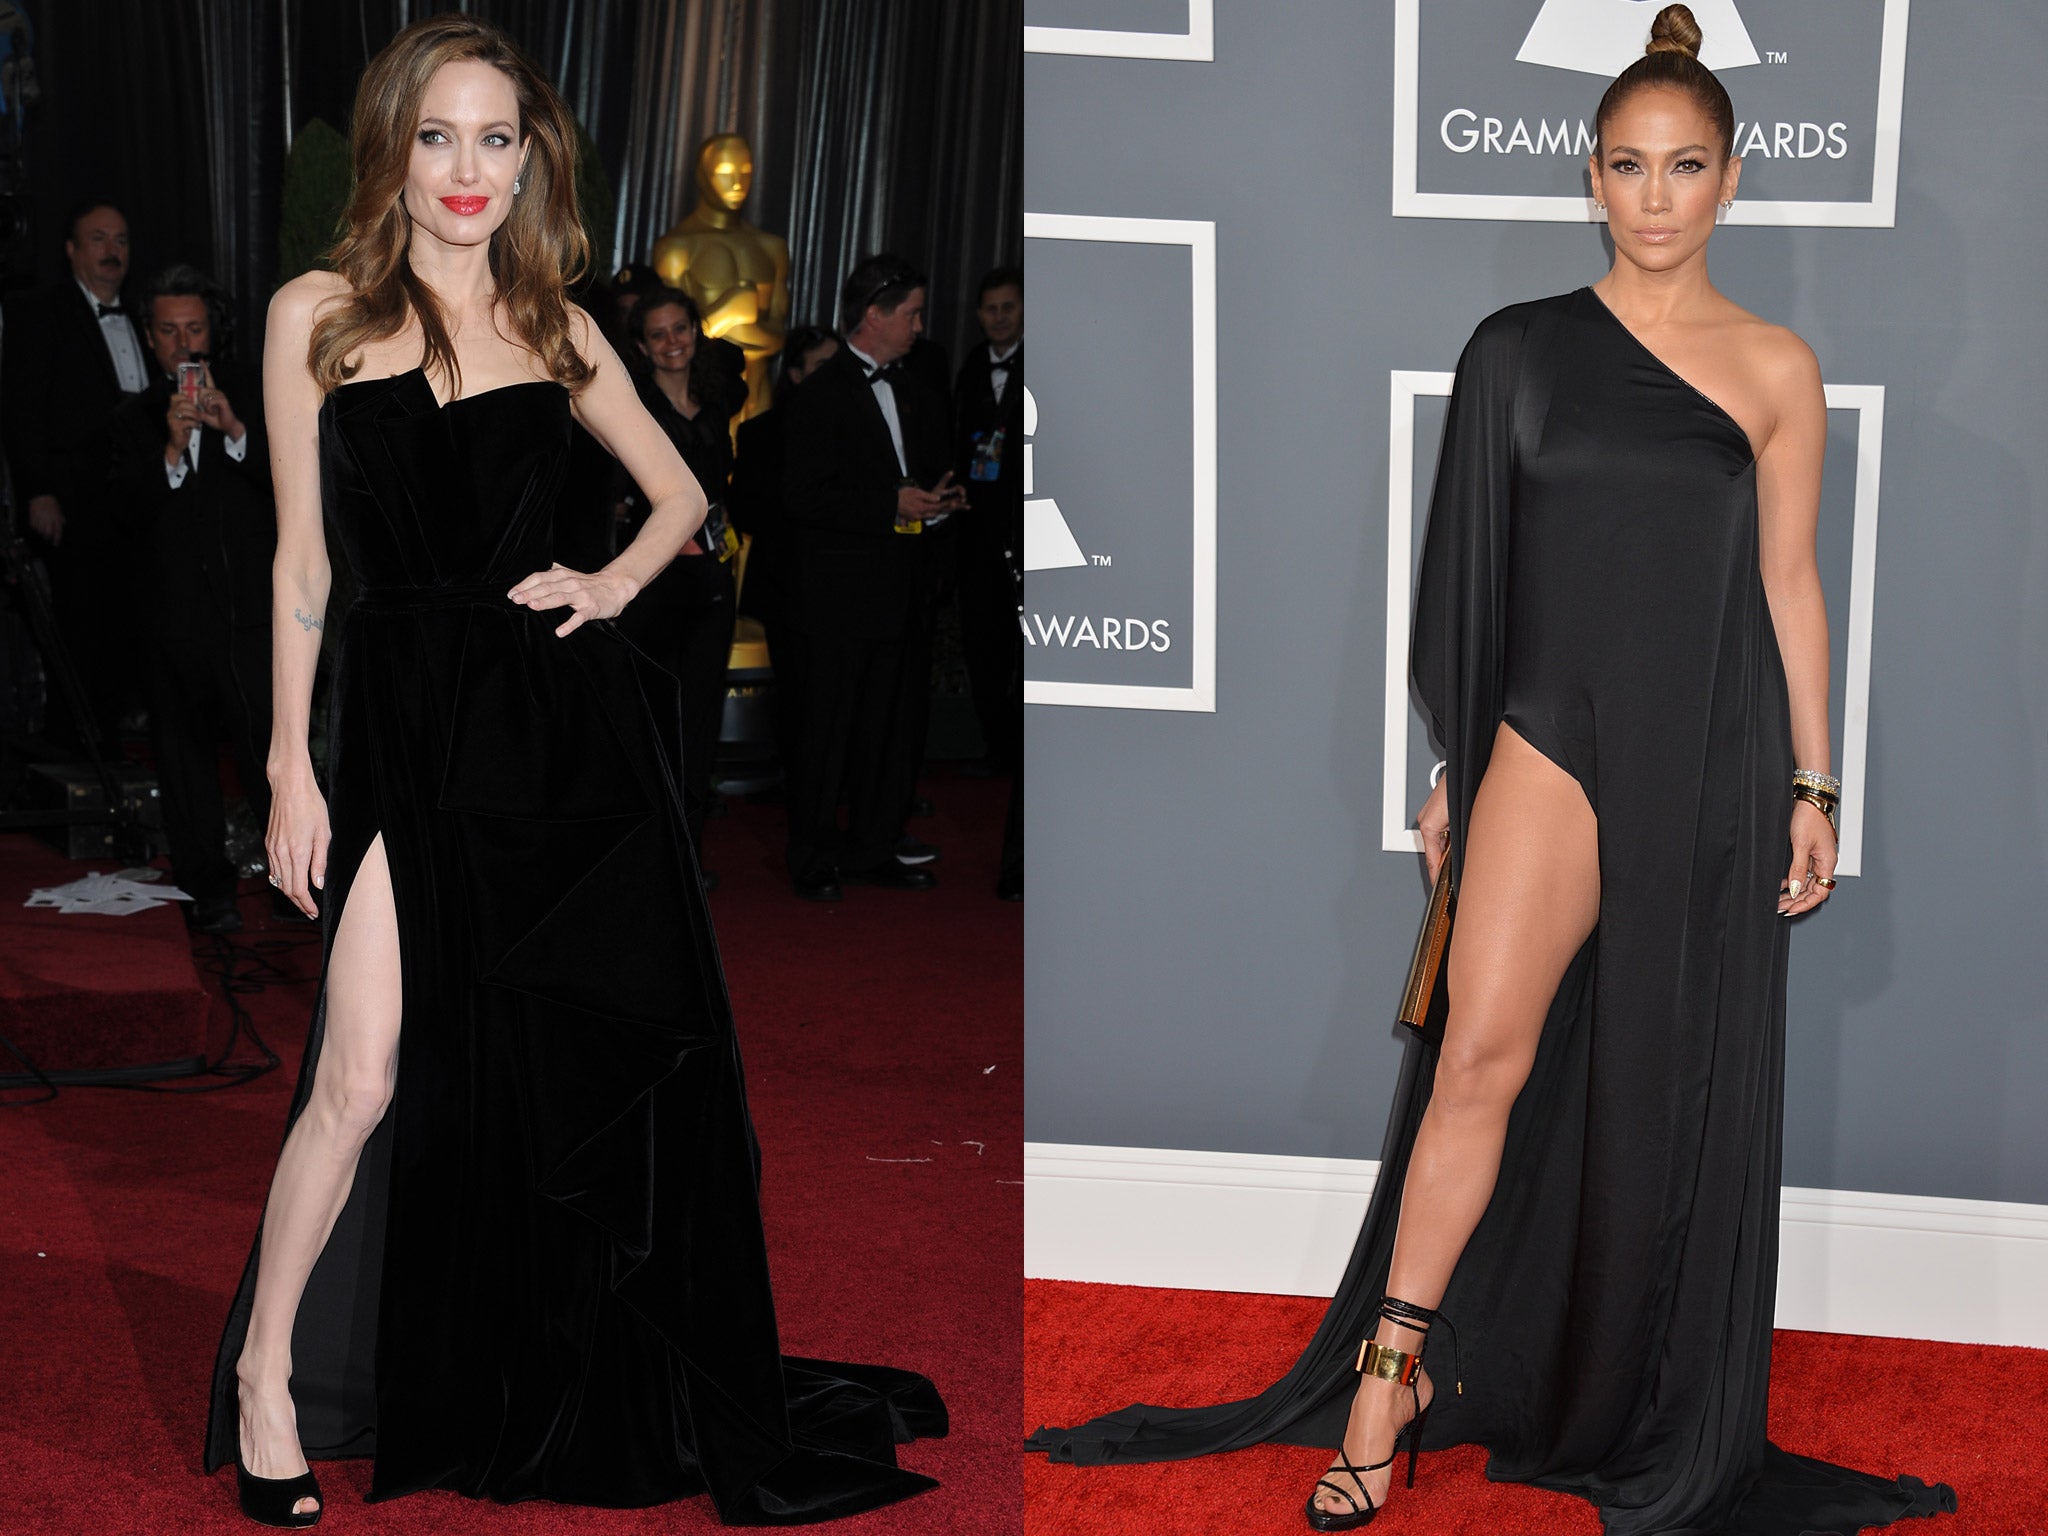 Angelina Jolie (left) at last year's Oscars in 'that' dress and Jennifer Lopez at this year's Grammys